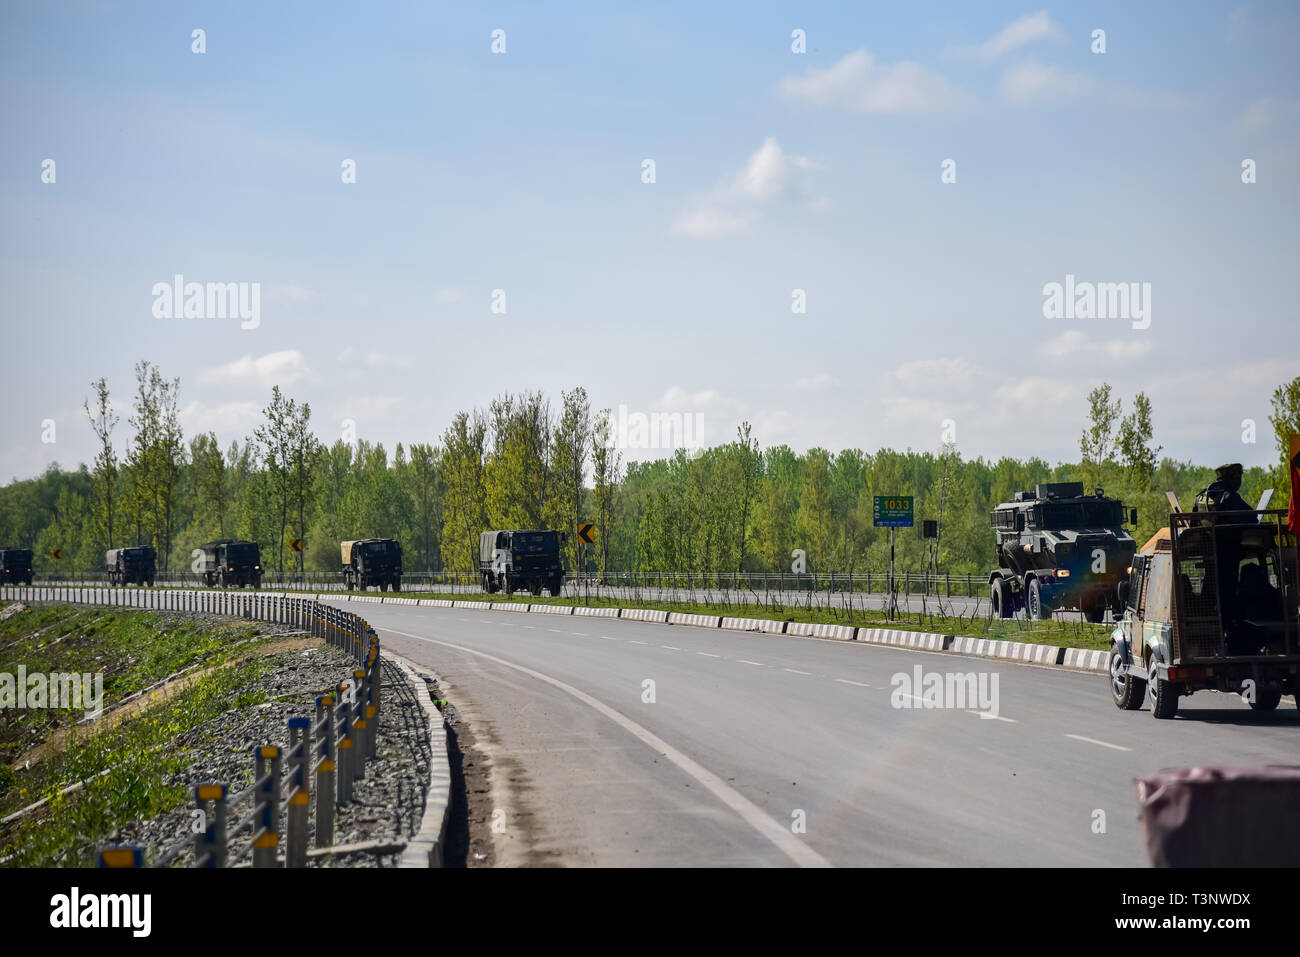 Indian army convoys seen moving on National Highway on the outskirts of Srinagar. The Indian authorities on Wednesday April 3, banned civilian traffic movement on the Jammu-Srinagar highway on Sundays and Wednesdays from 4 a.m. to 5 p.m. to ensure the safety of the Indian security convoys following a suicide attack on Indian army convoy in Pulwama on Thursday, February 14 which killed more than 50 Indian Army men. Stock Photo